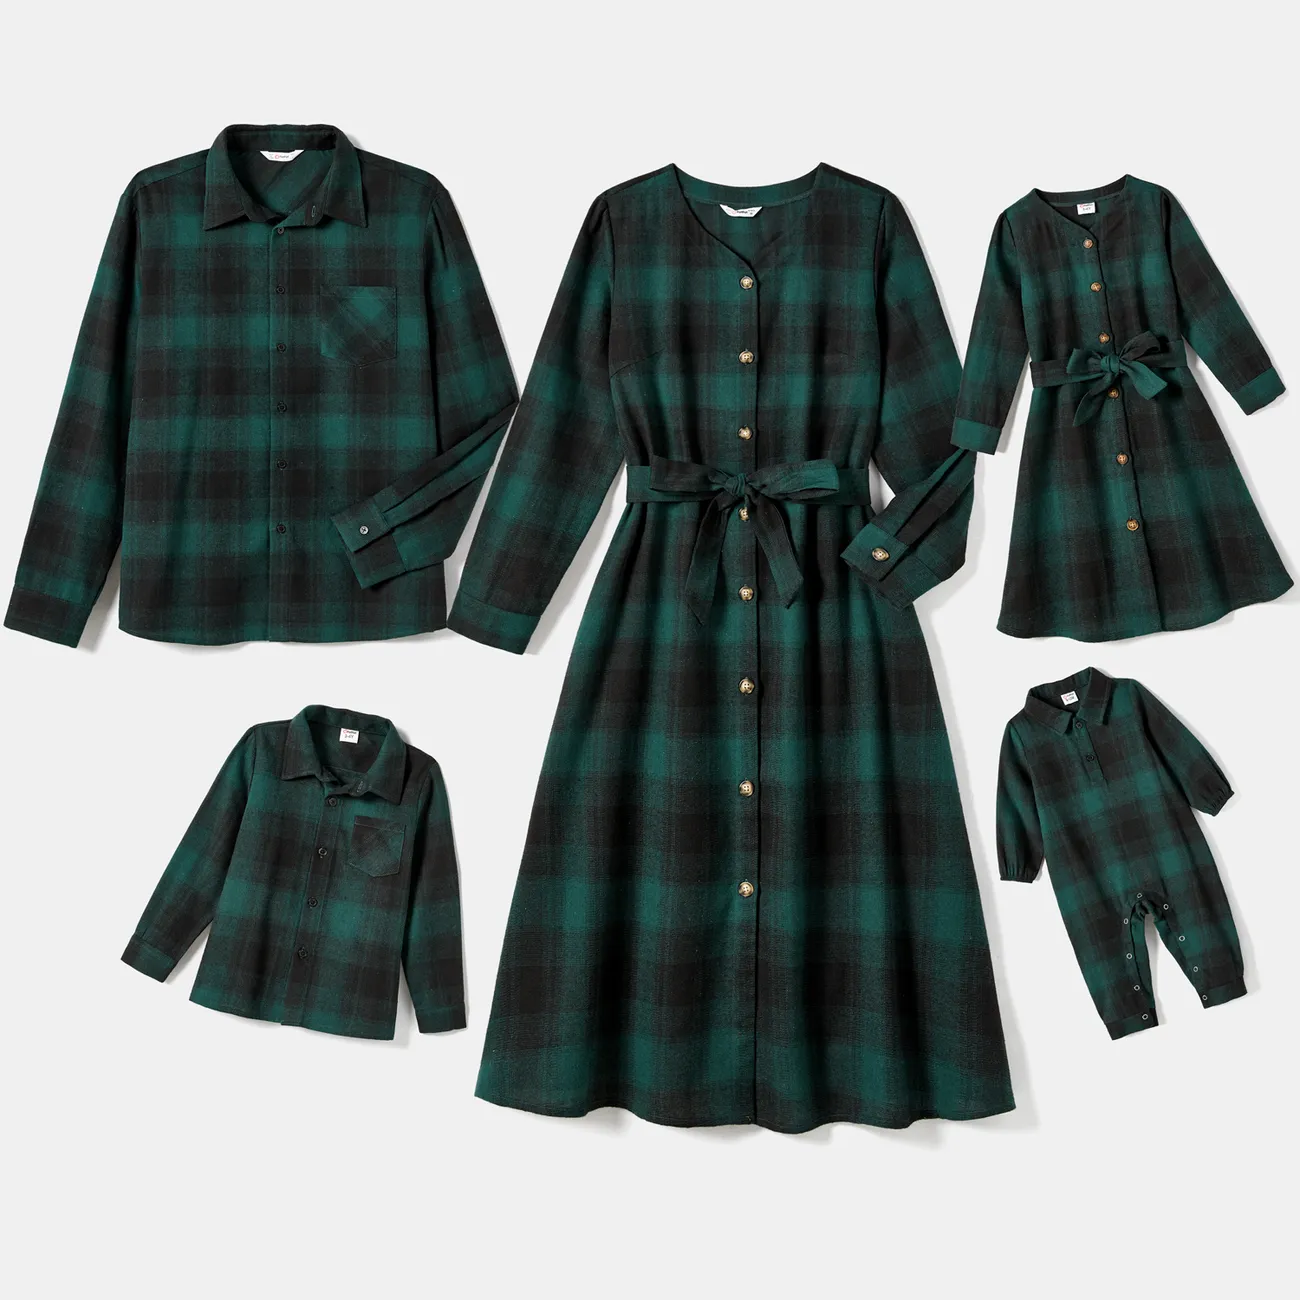 Family Matching Casual Plaid Long-sleeve Belted Dresses & Tops Sets Dark Green big image 1